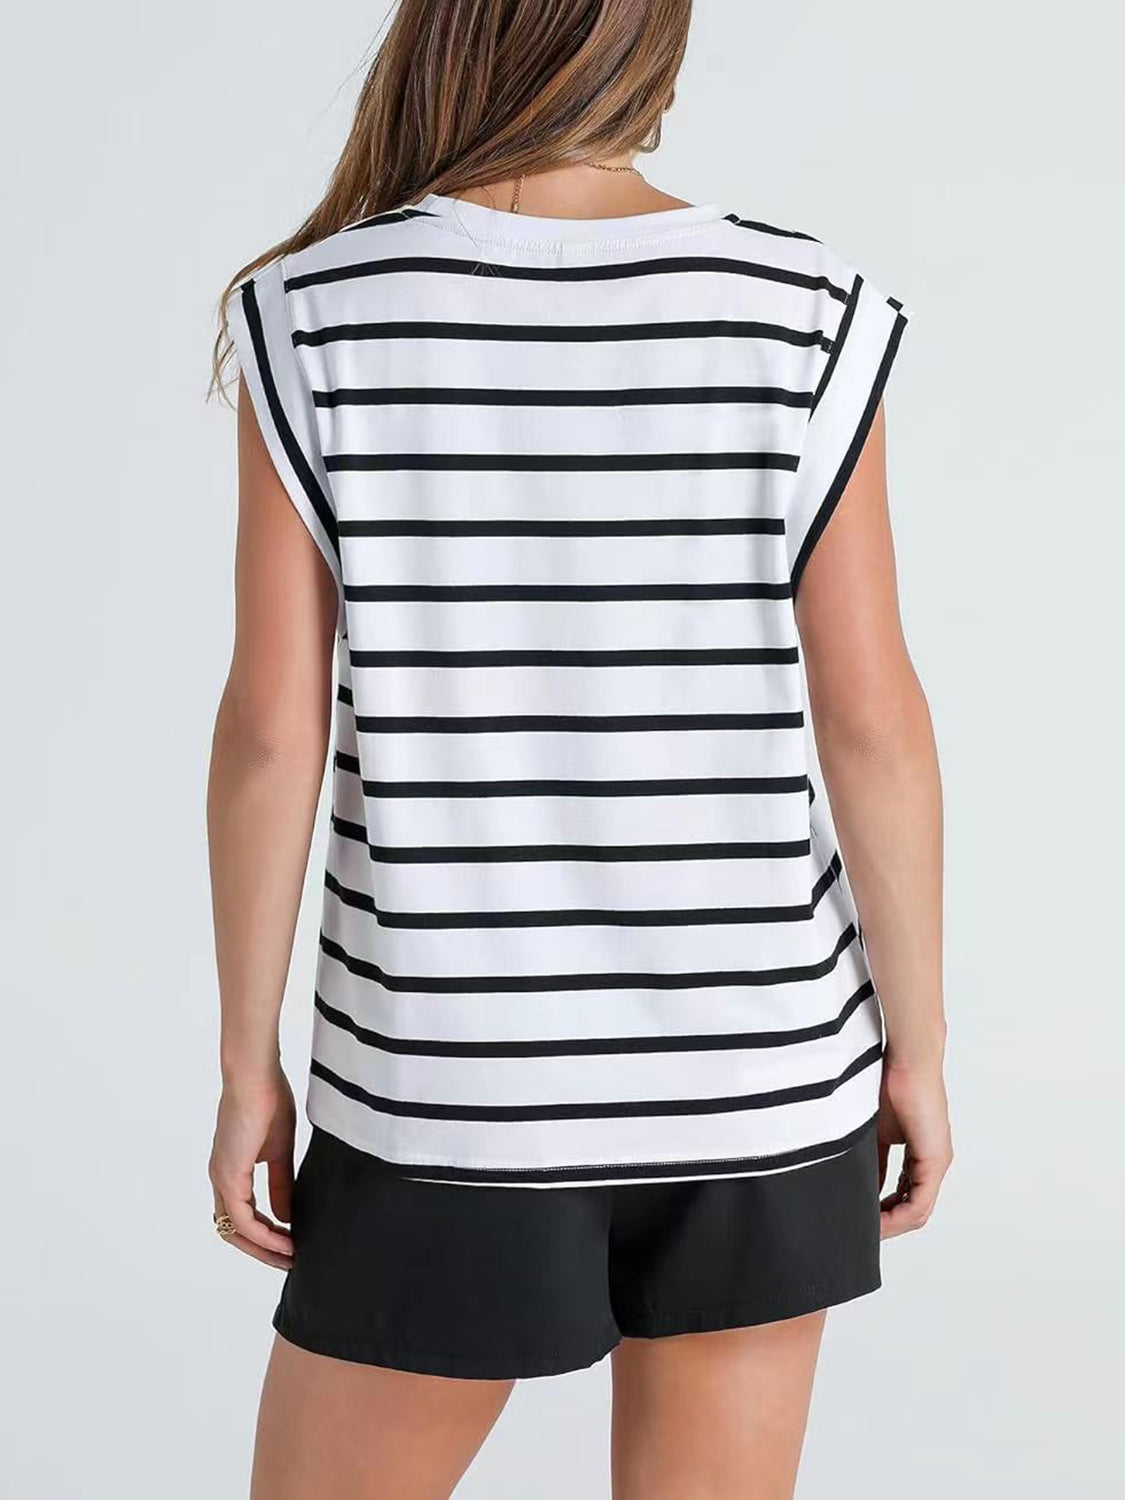 Striped Round Neck Cap Sleeve T-Shirt Women's Short Sleeve Top With Stripes KESLEY